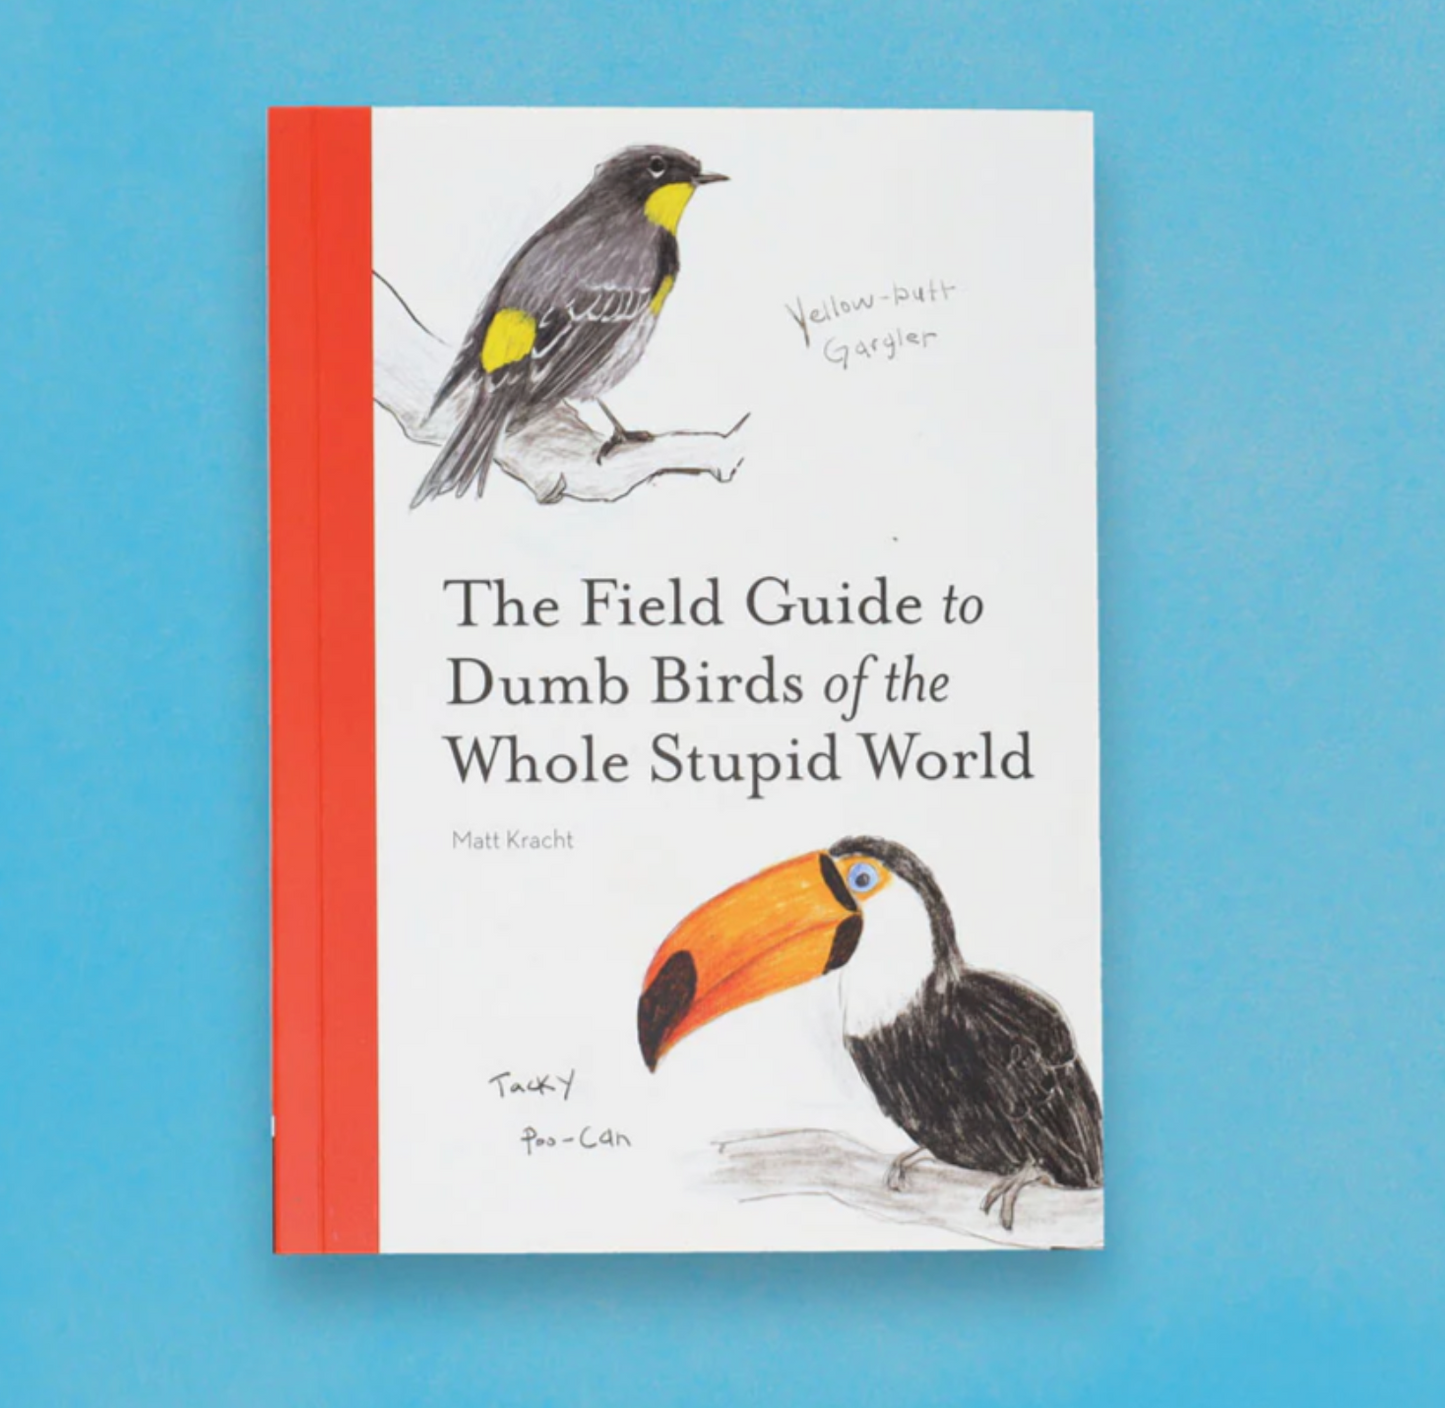 The Field Guide to Dumb Birds of the Whole Stupid World Book - 192 pages